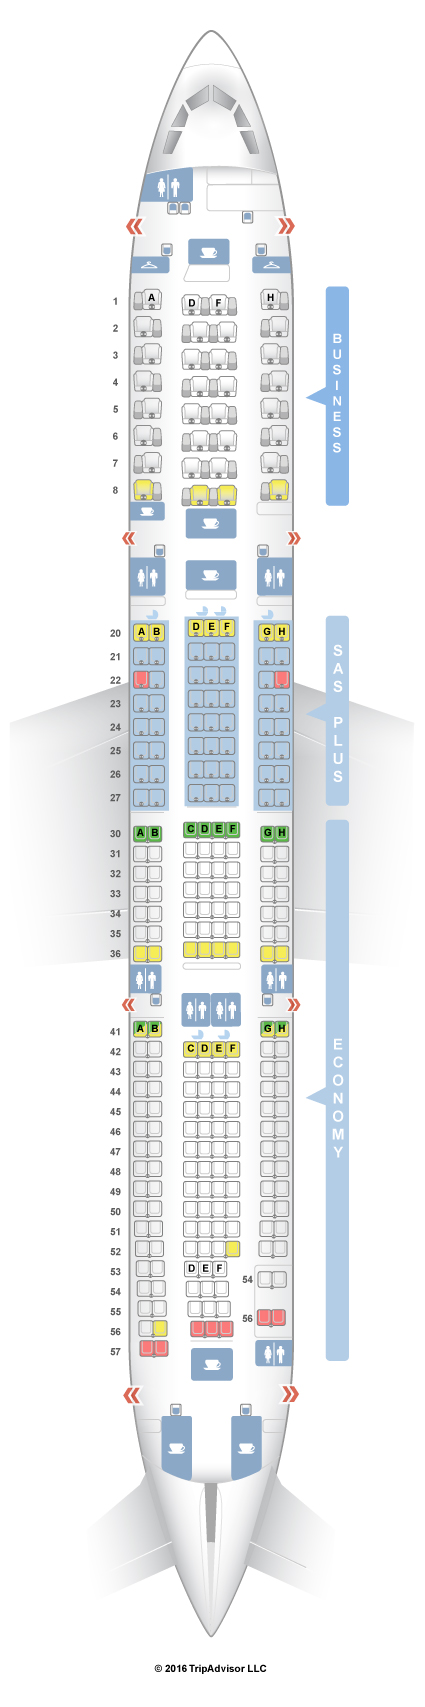 a330-300 seat map